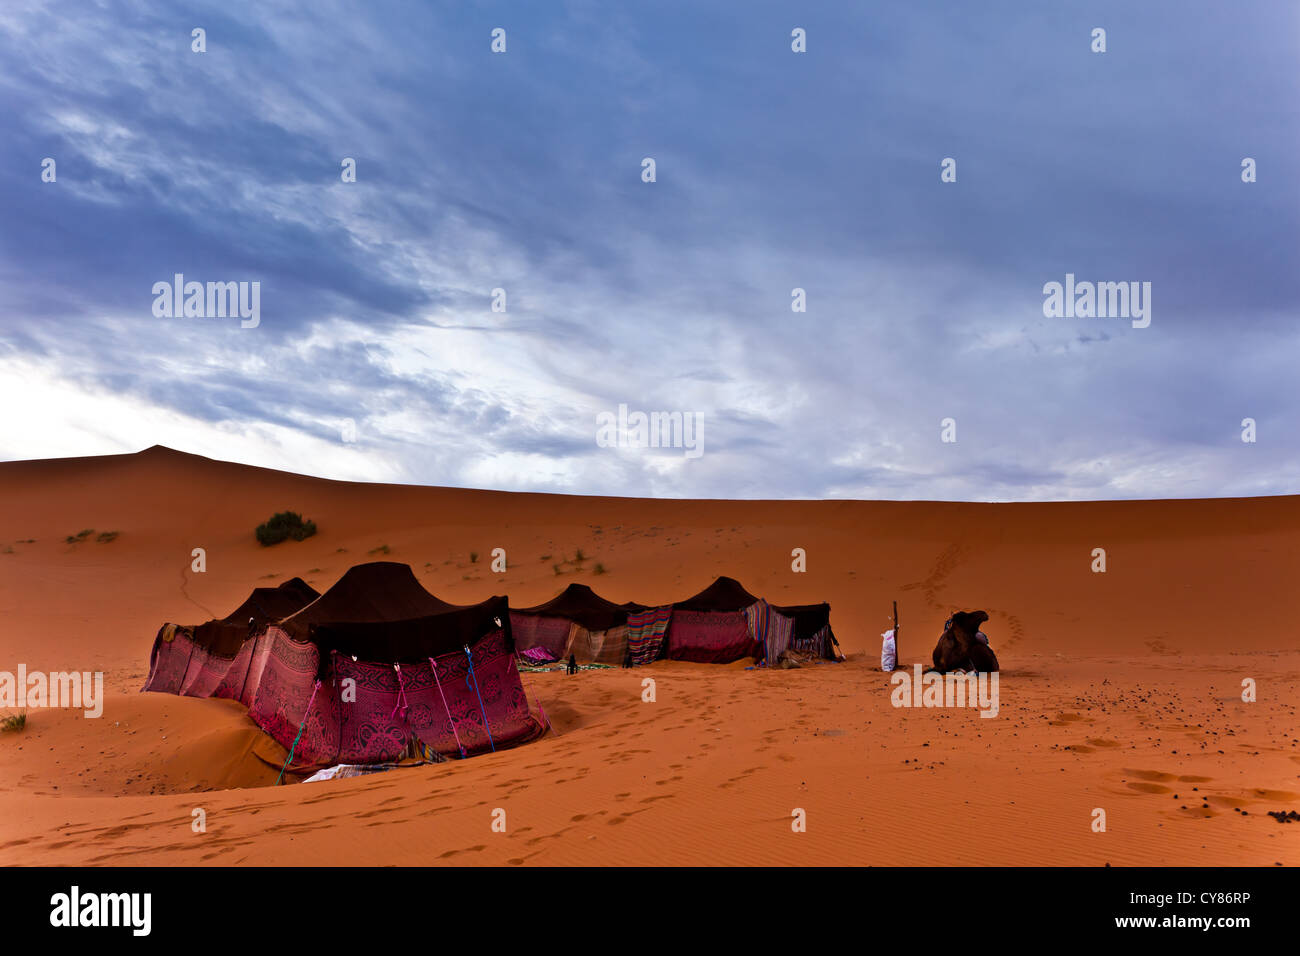 Colorful Bedouin nomad tent camp at an oasis in the Sahara Desert  and dramatic cloudy sky in Morocco Stock Photo